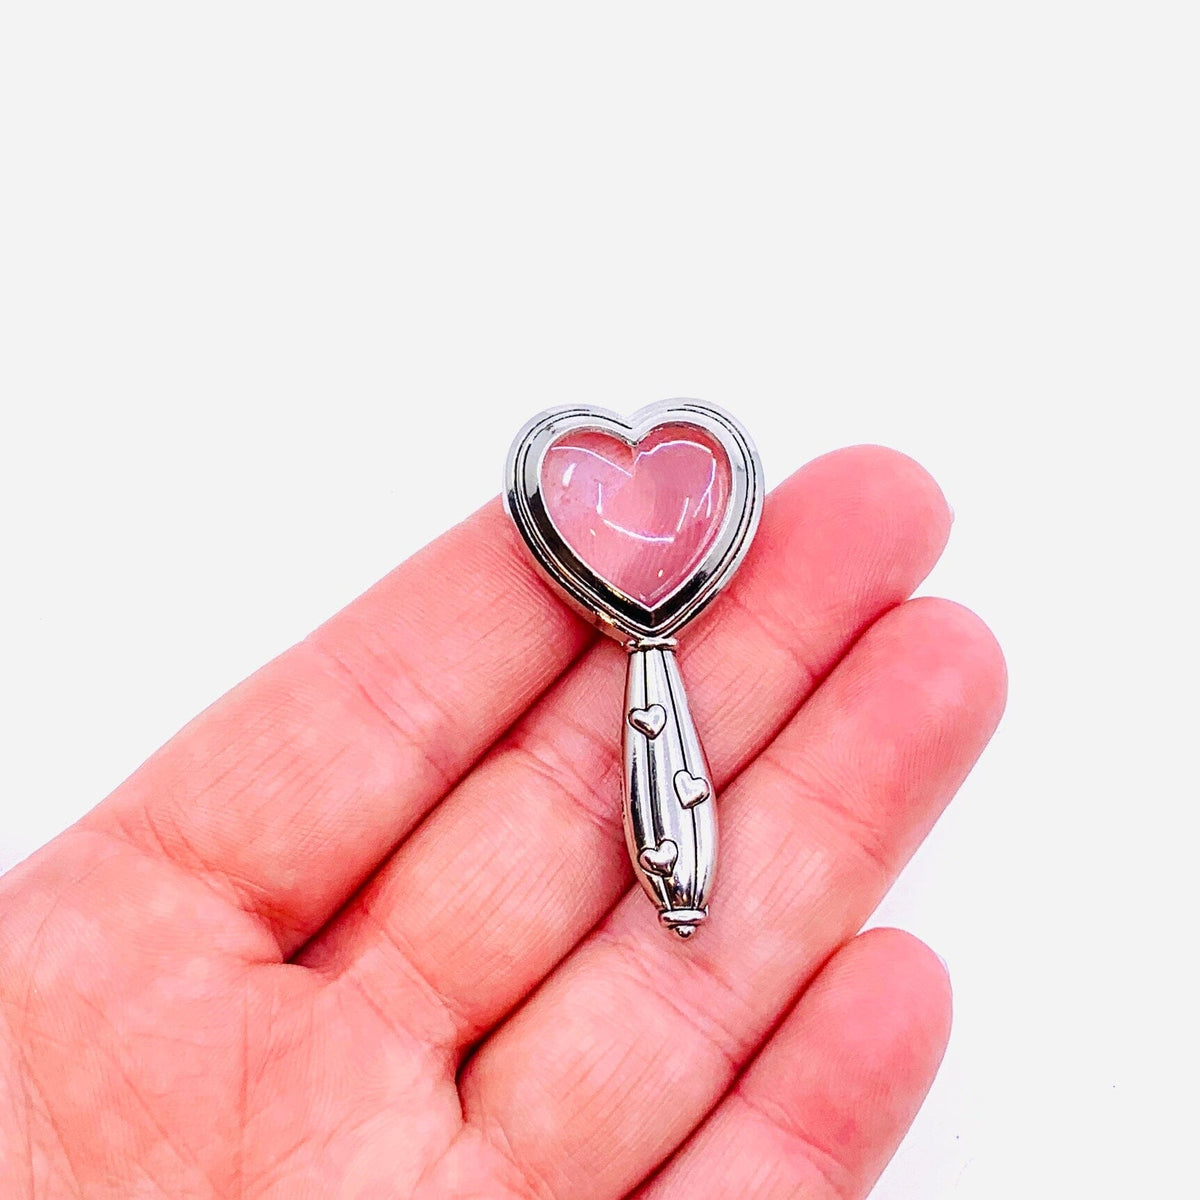 Find The Love in The Little Things Charm PT4 Miniature GANZ 